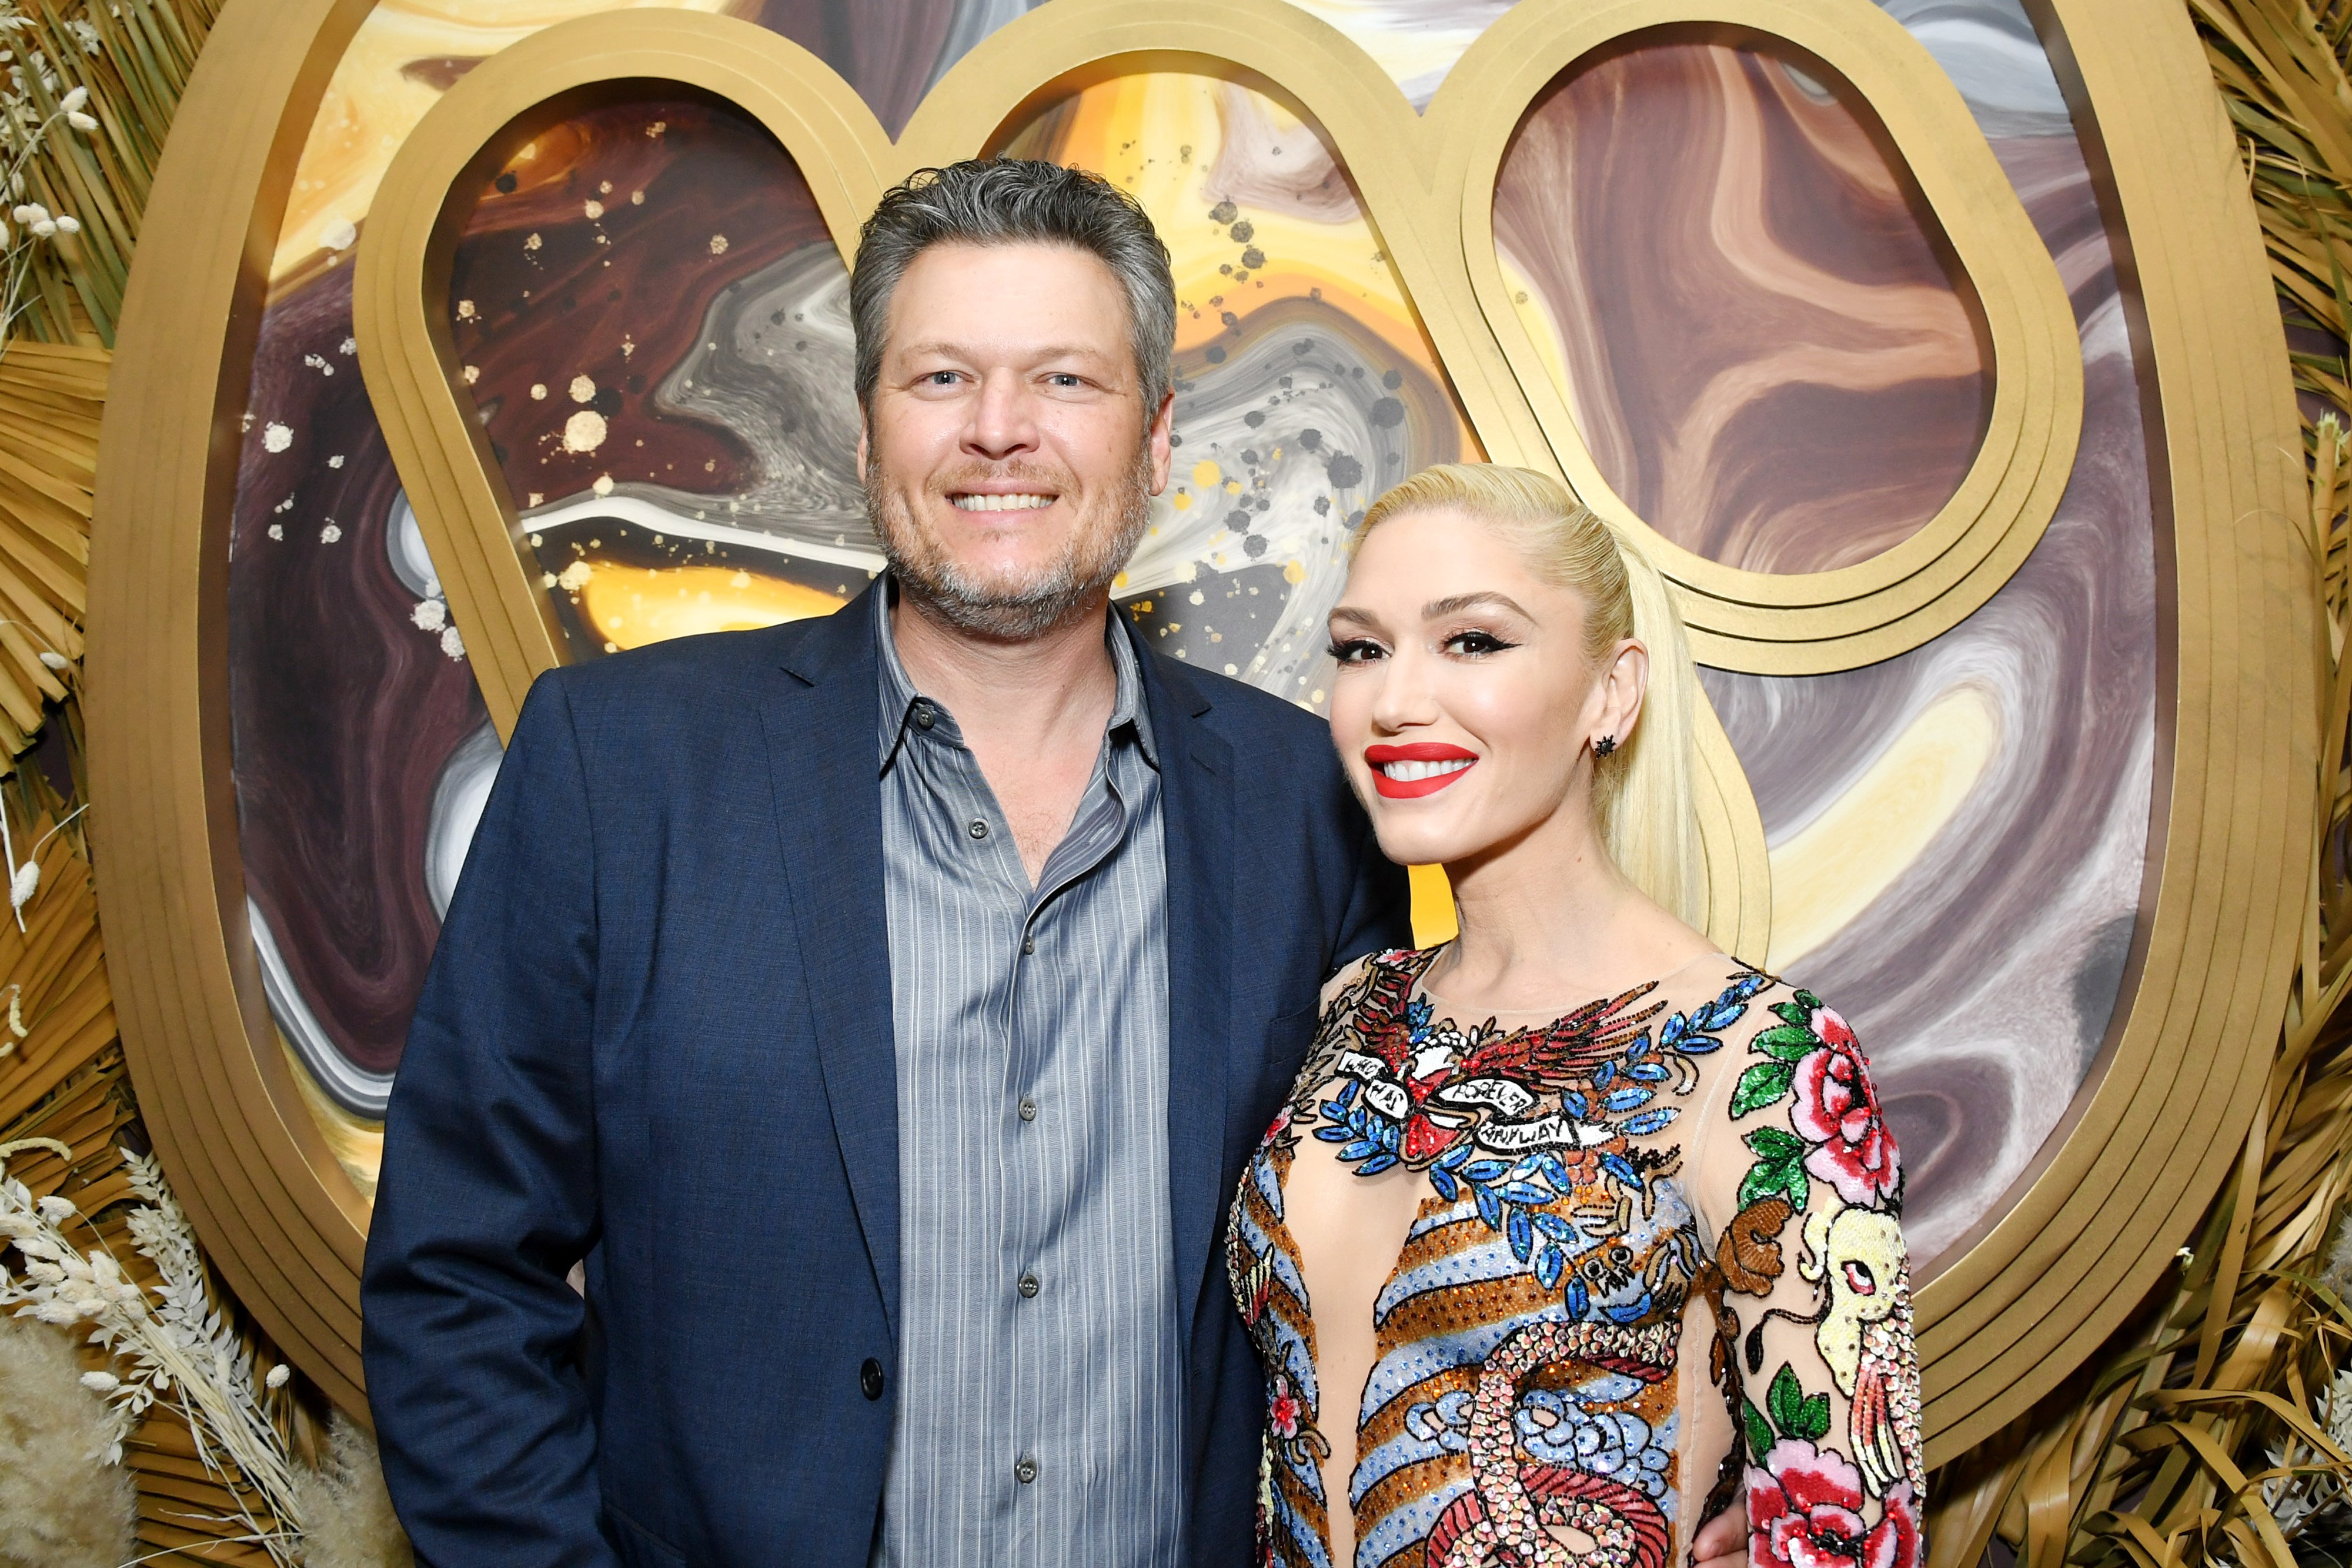  Blake Shelton and Gwen Stefani attend the Warner Music Group Pre-Grammy Party on January 23, 2020, in Hollywood, California. | Source: Getty Images.